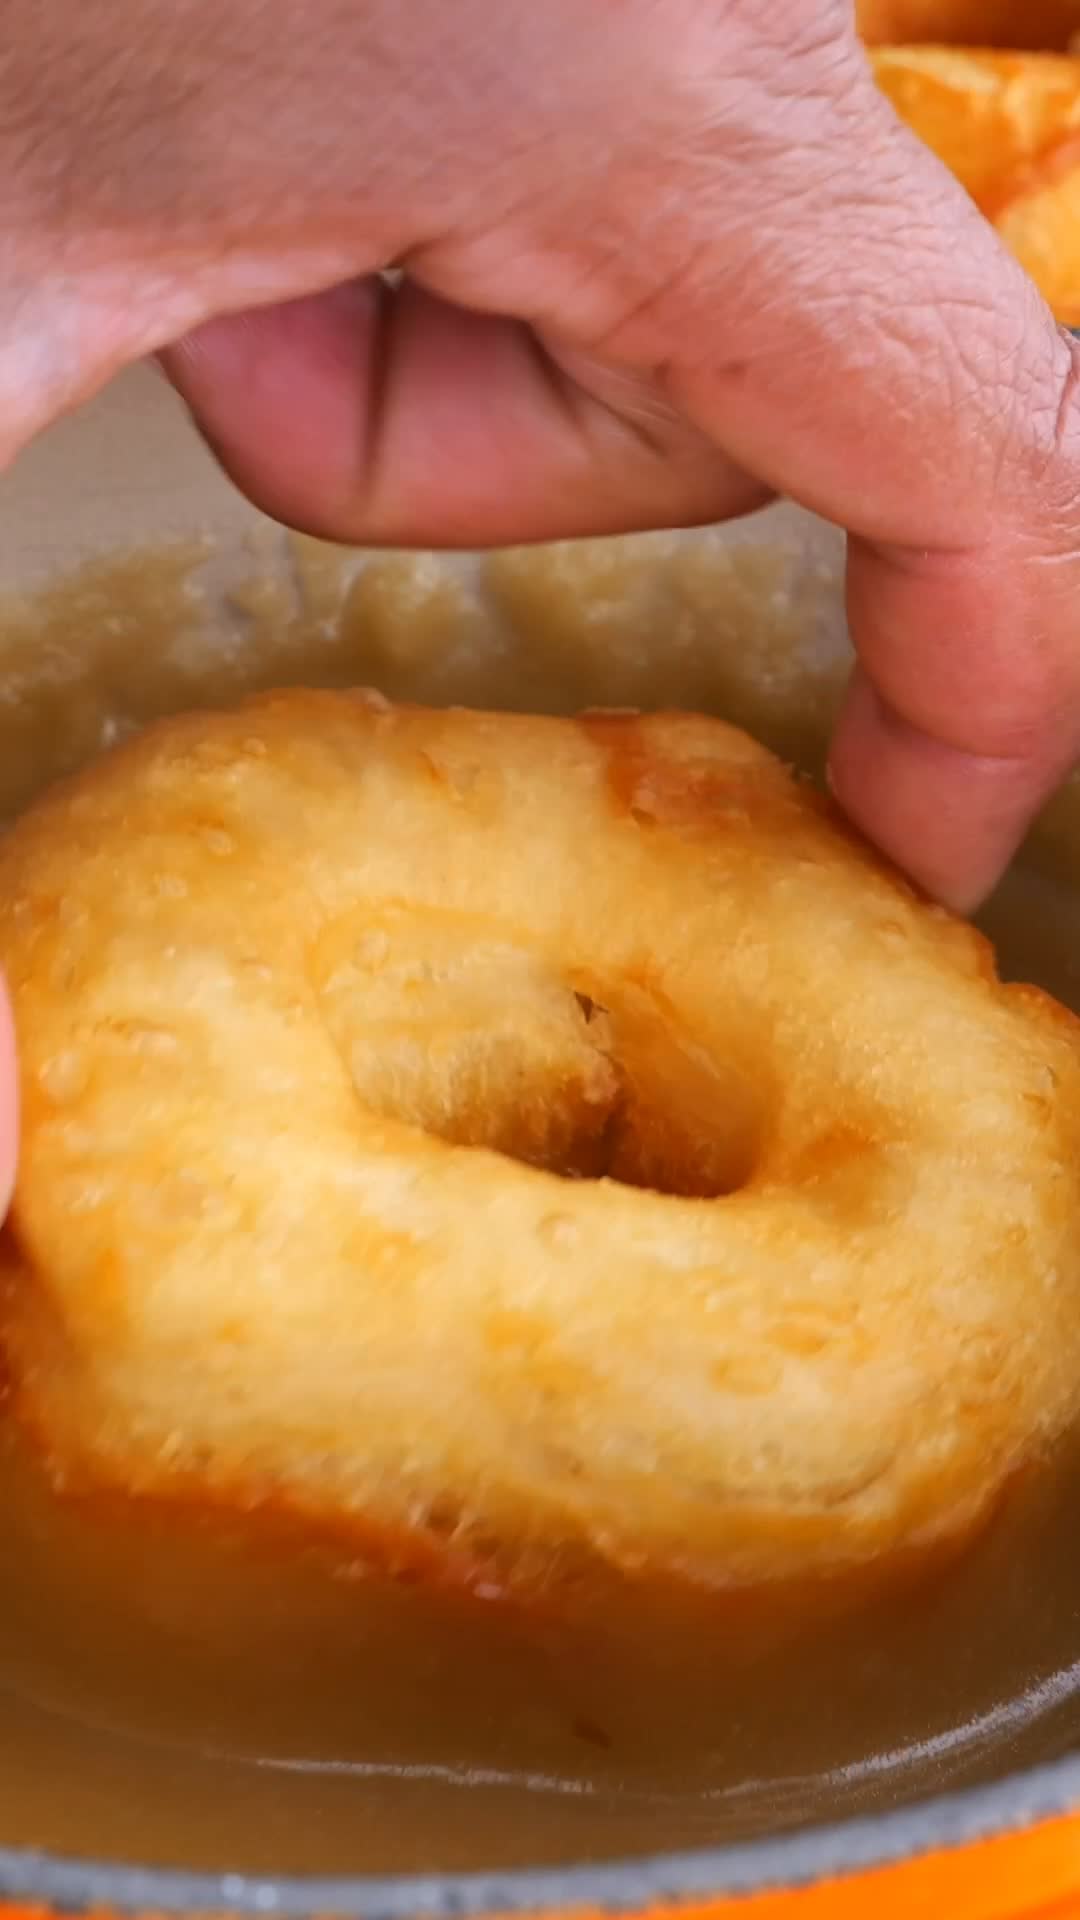 A donut being dipped in a maple glaze